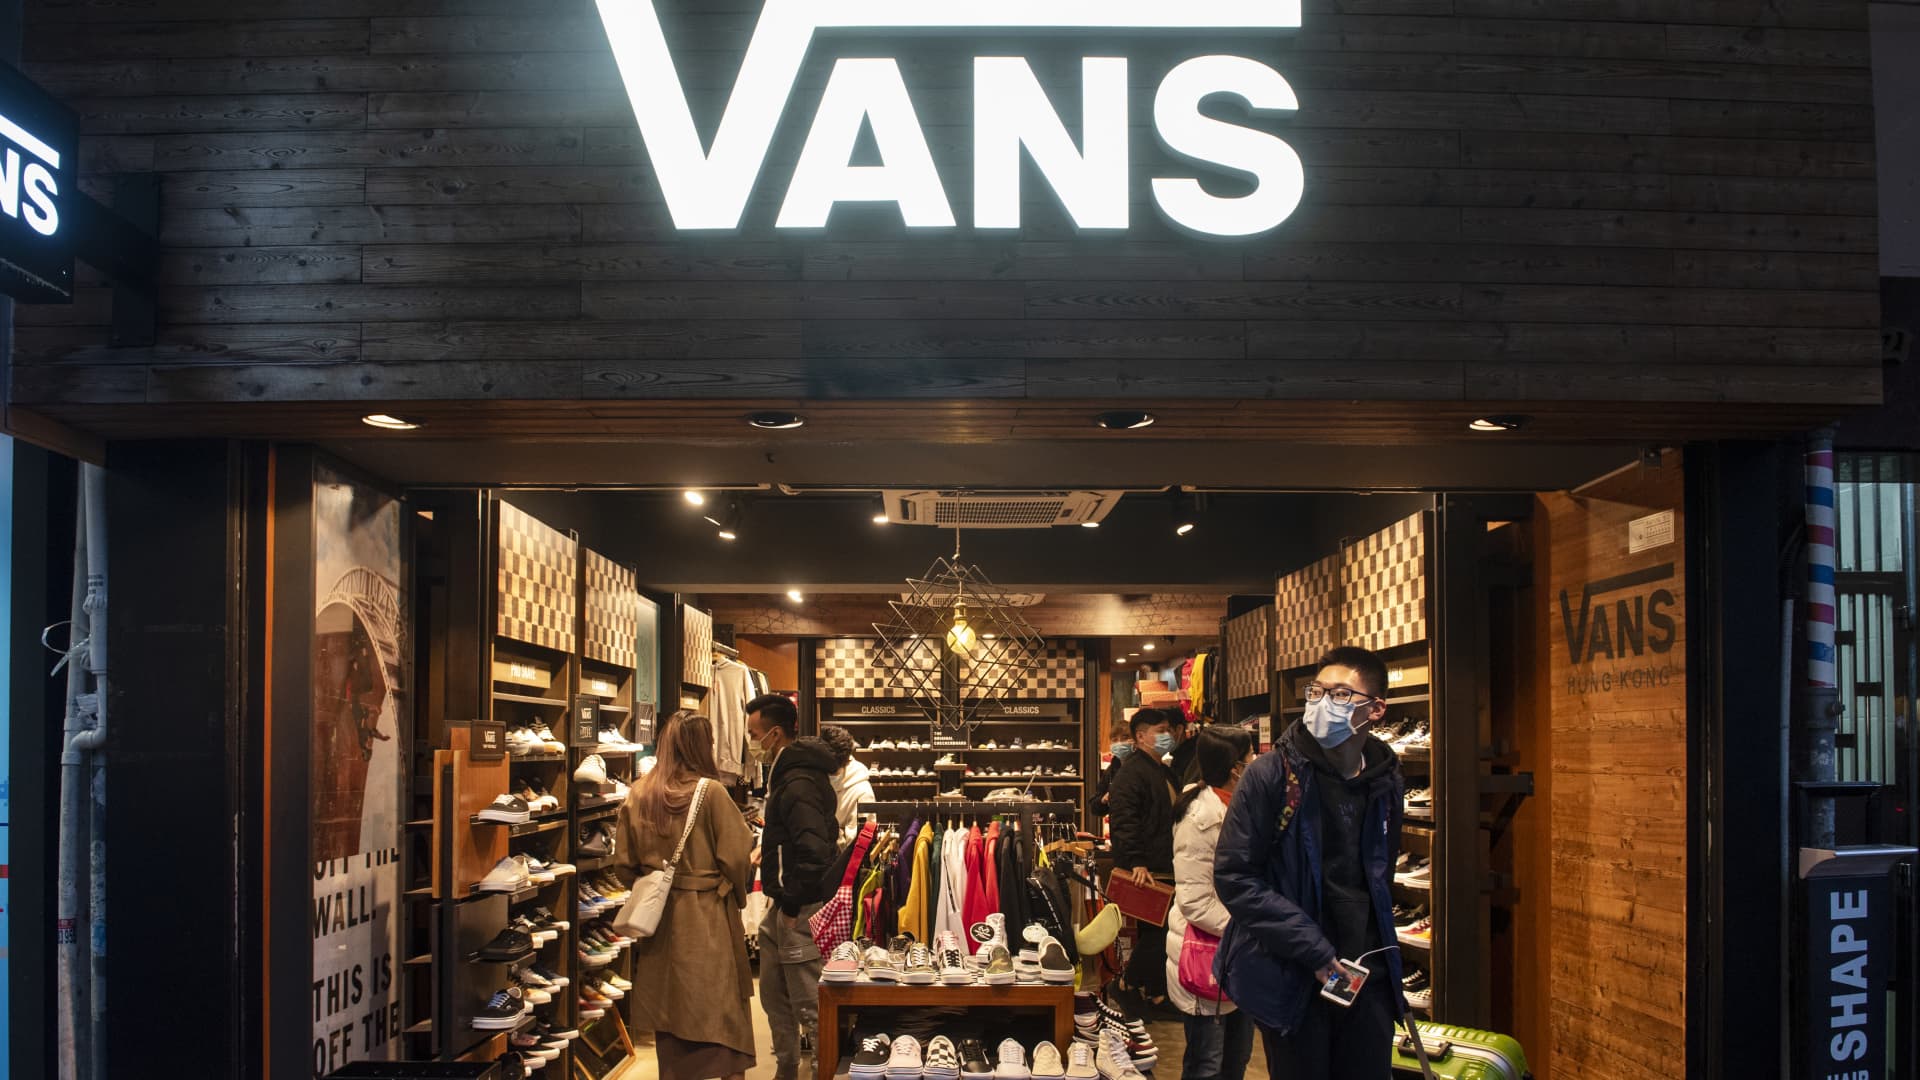 Vans owner VF Corp shares tumble after cyberattack